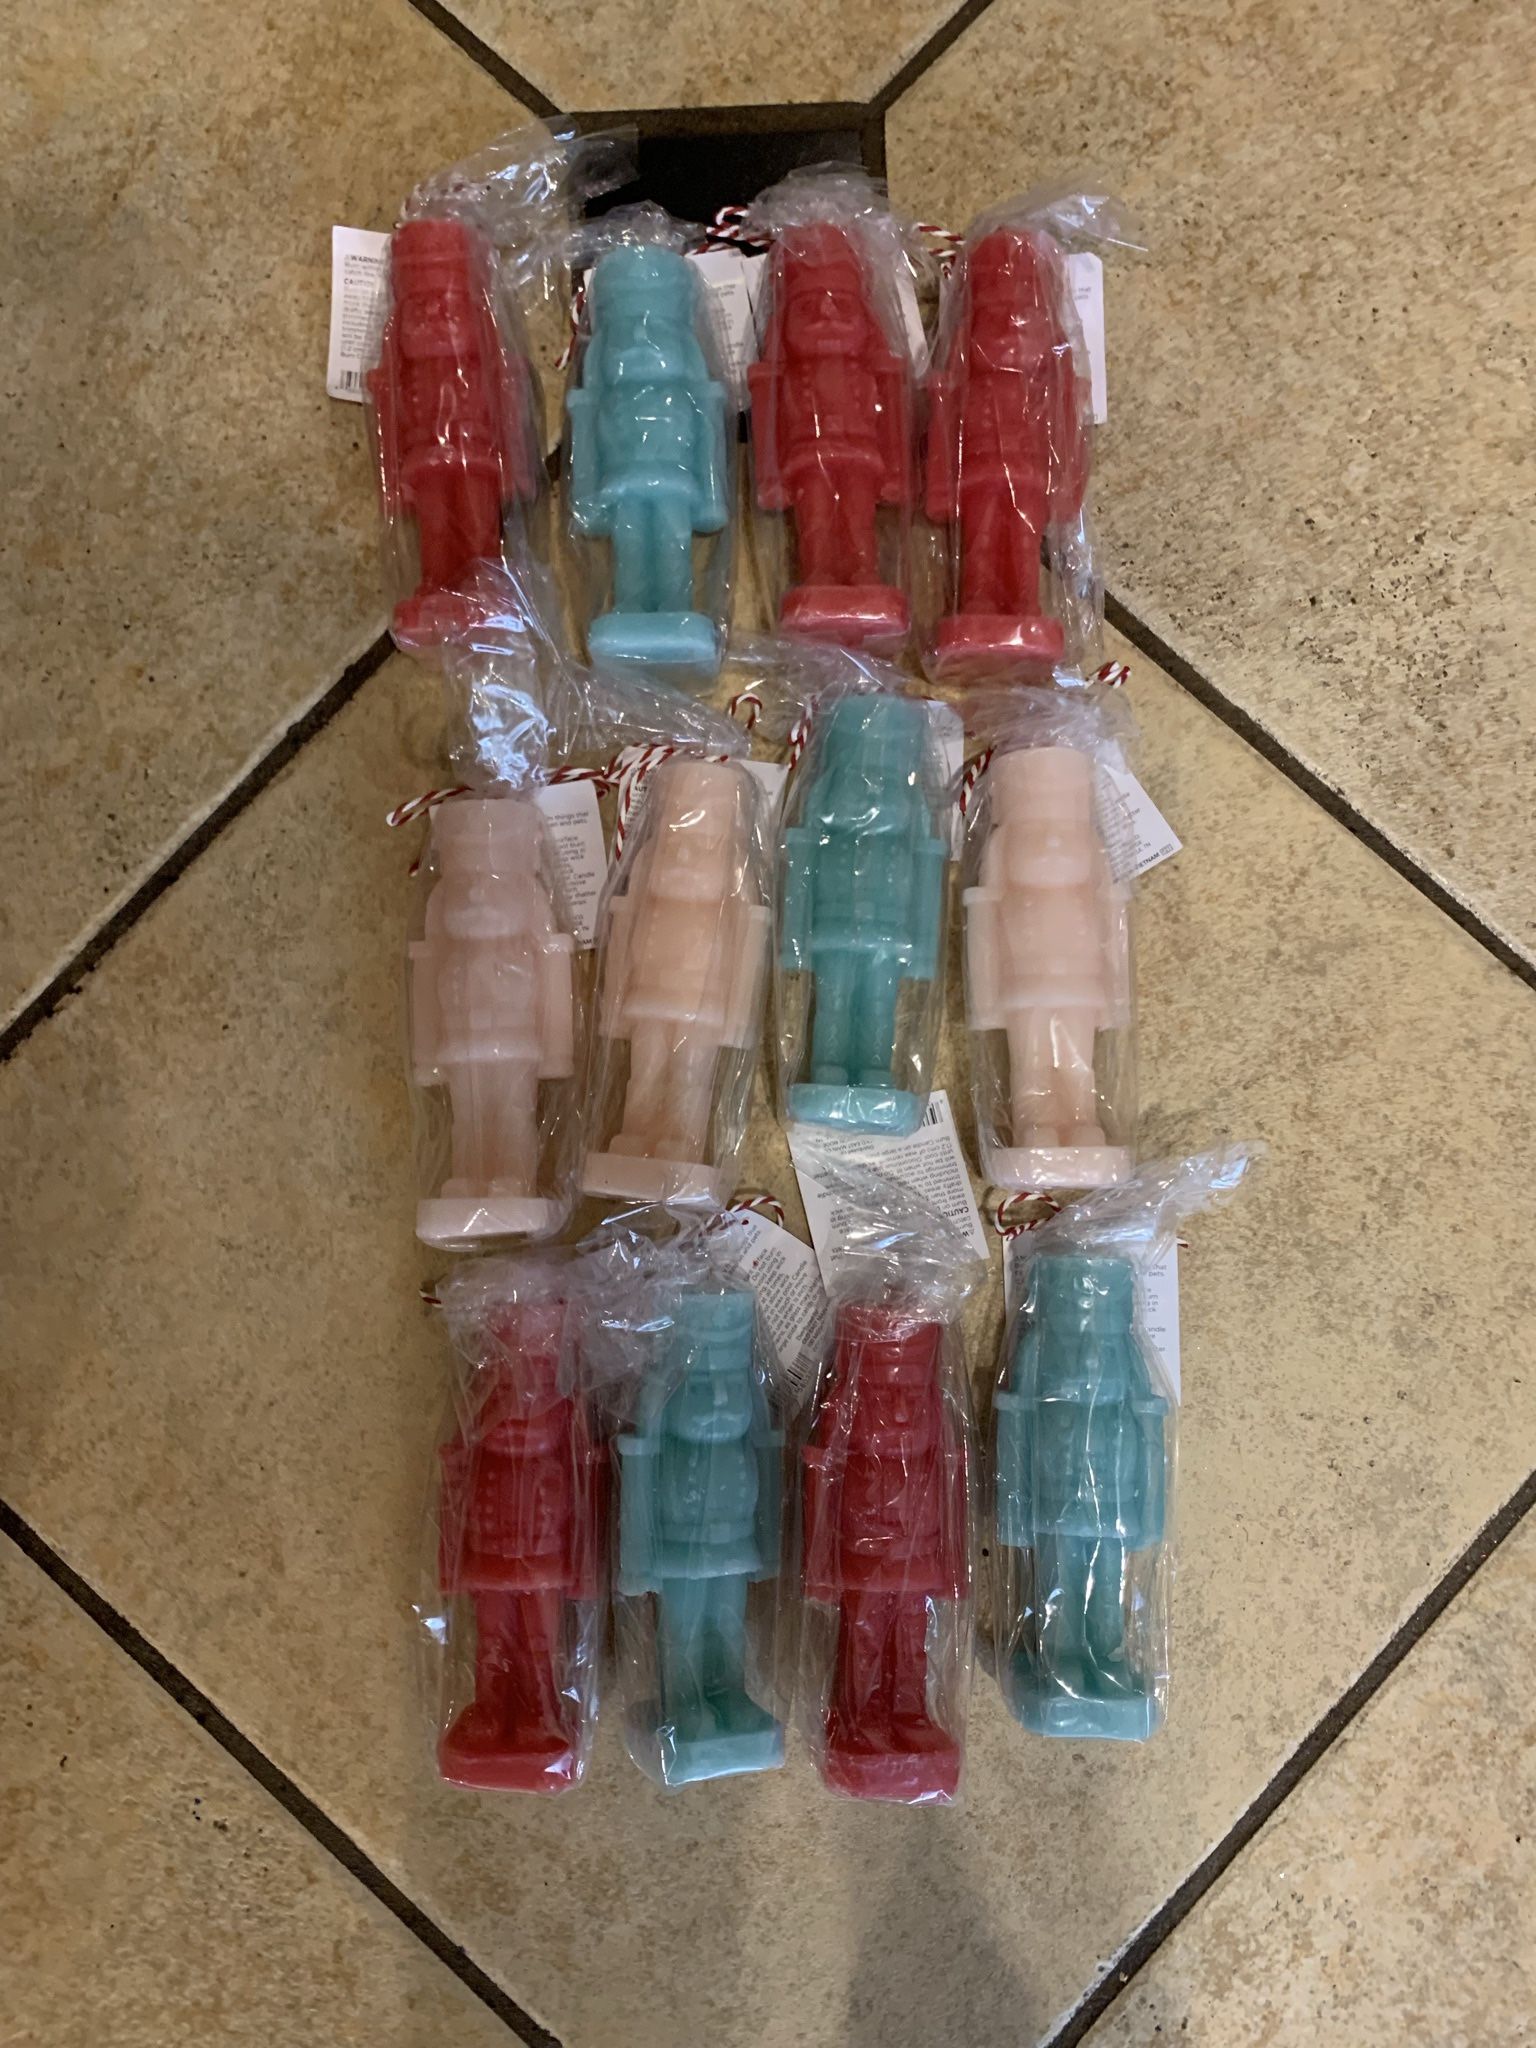 Wax Candle Nut crackers 12 For $10 